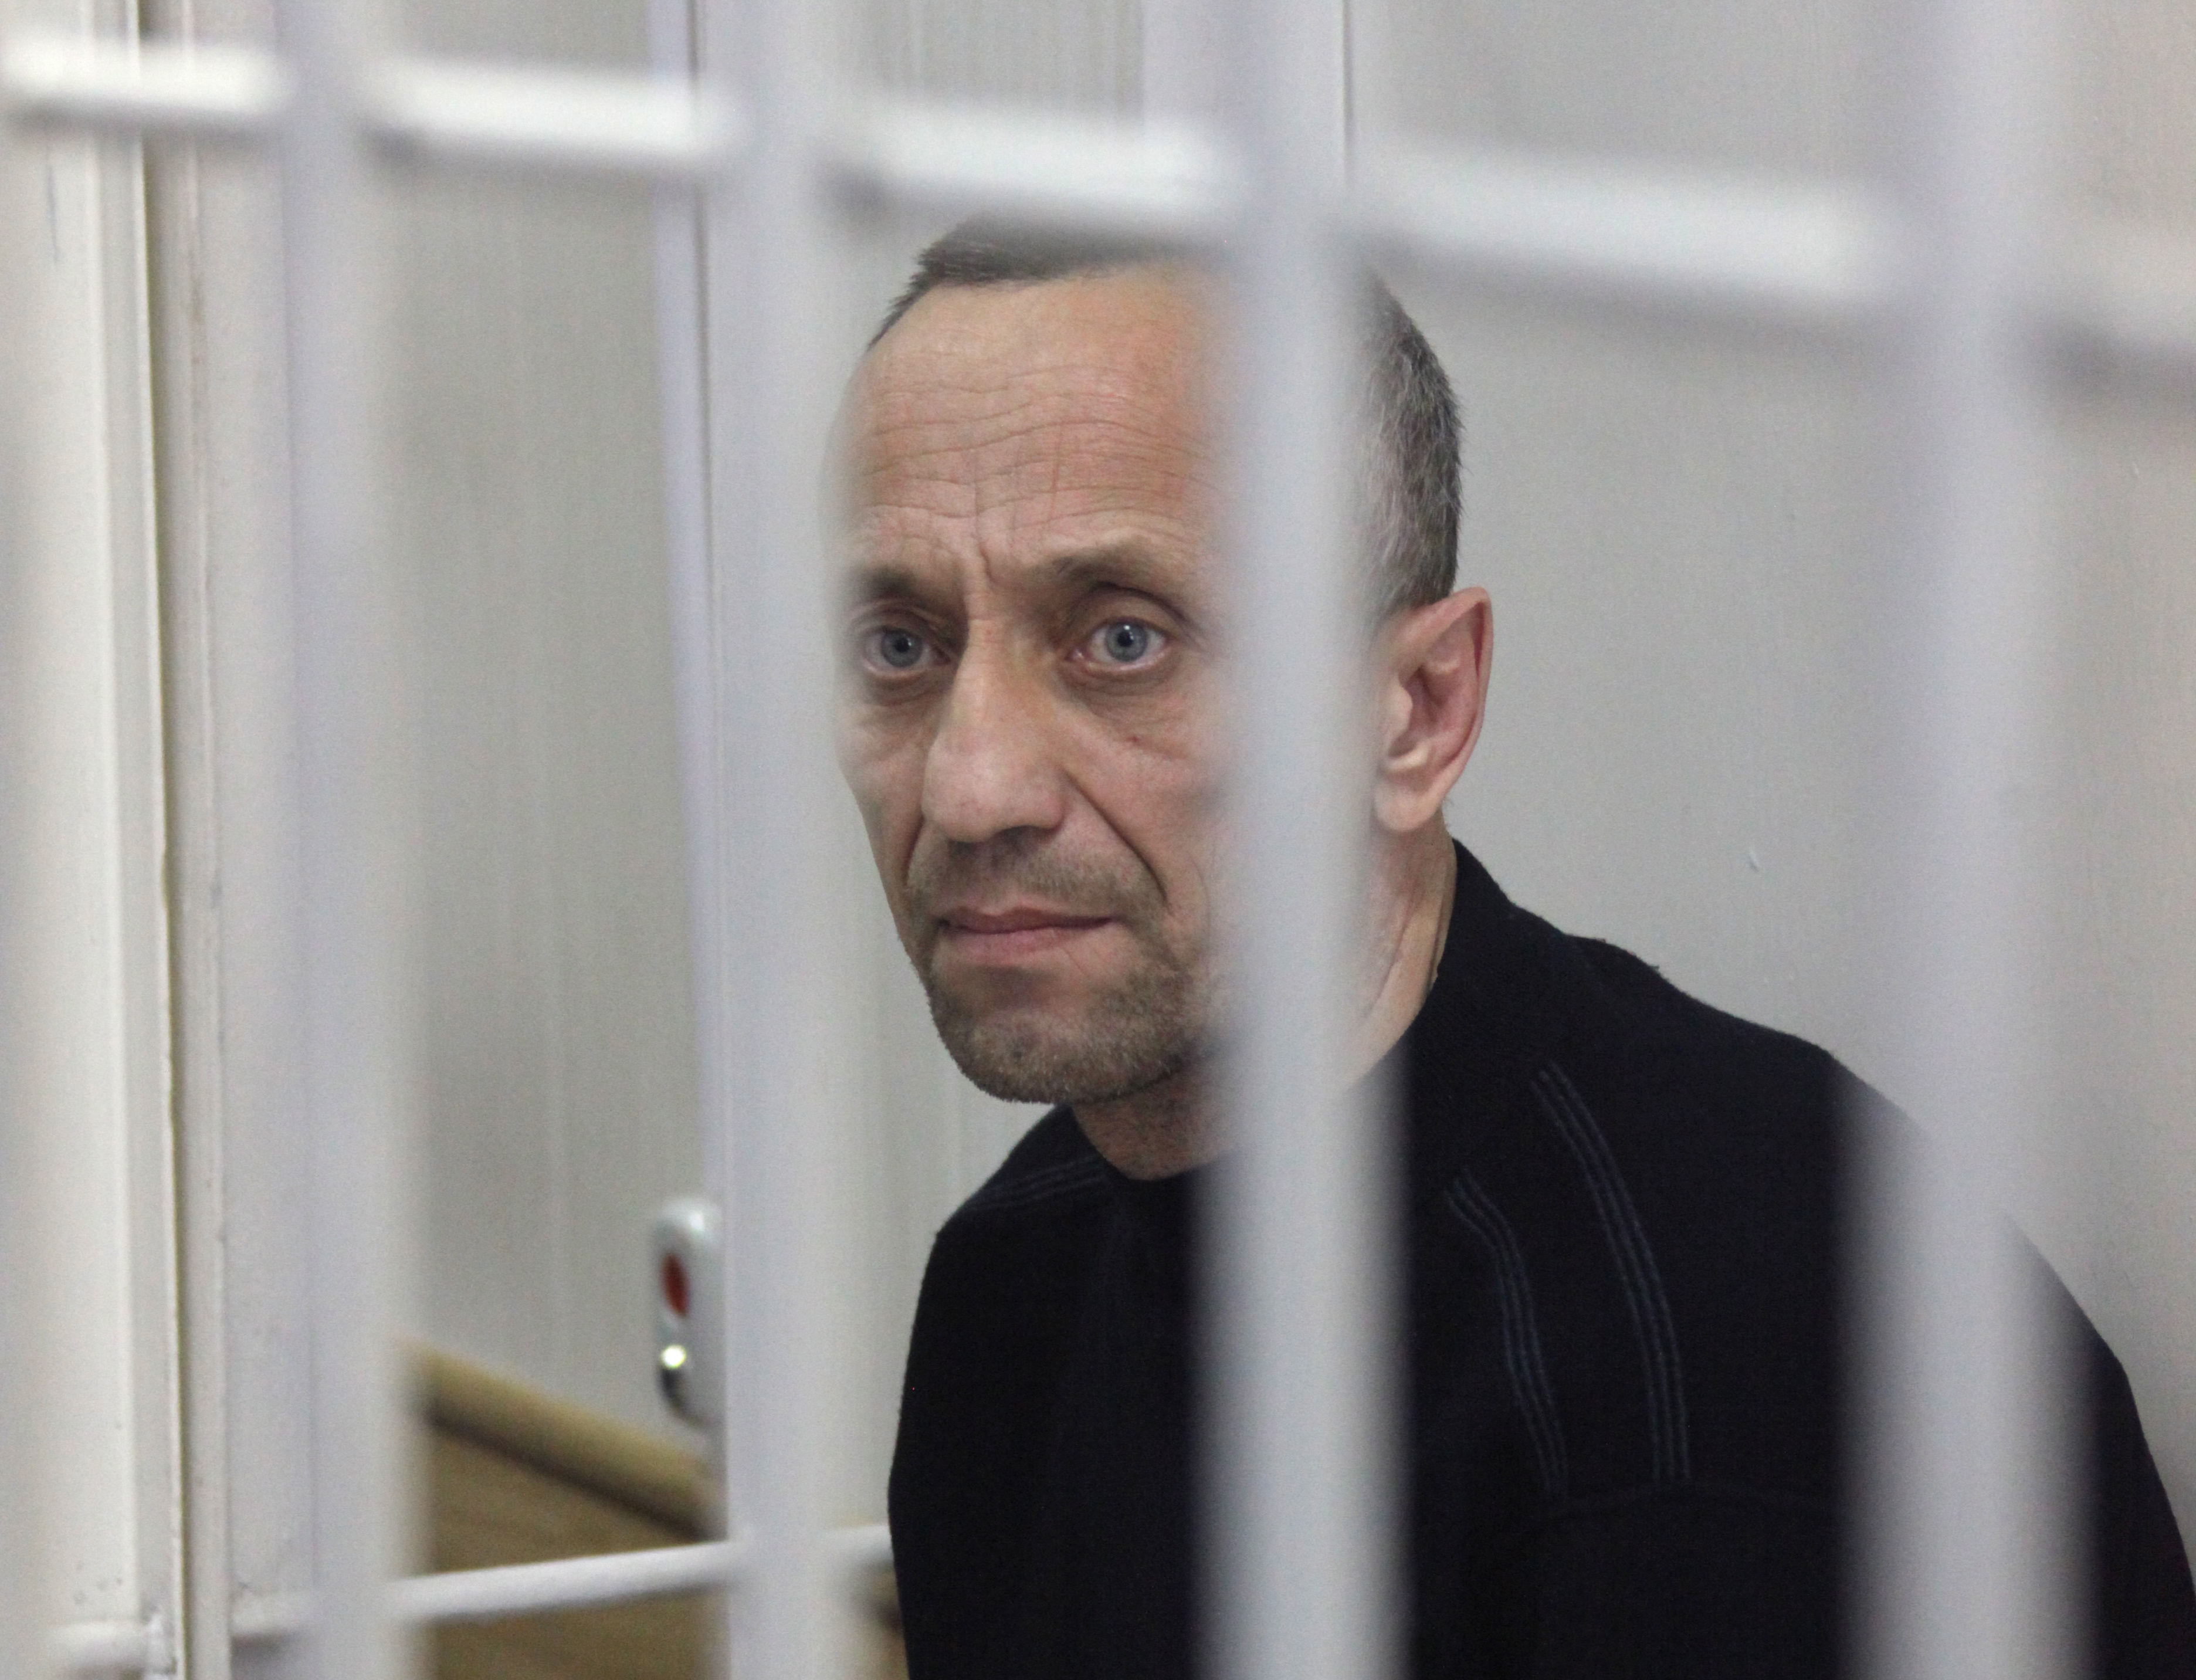 epa07221375 (FILE) - Former police officer Mikhail Popkov during a verdict announcement at the Irkutsk Regional Court in the city of Irkutsk, eastern Siberia, Russia, 14 January 2015 (reissued 10 December 2018). The convicted rapist and serial killer Mikhail Popkov, who was sentenced to life for killing 22 women during a six-year period from 1994 to 2000, was given an additional life sentence 10 December 2018   for 56 additional killings.  EPA/DMITRY DMITRIYEV